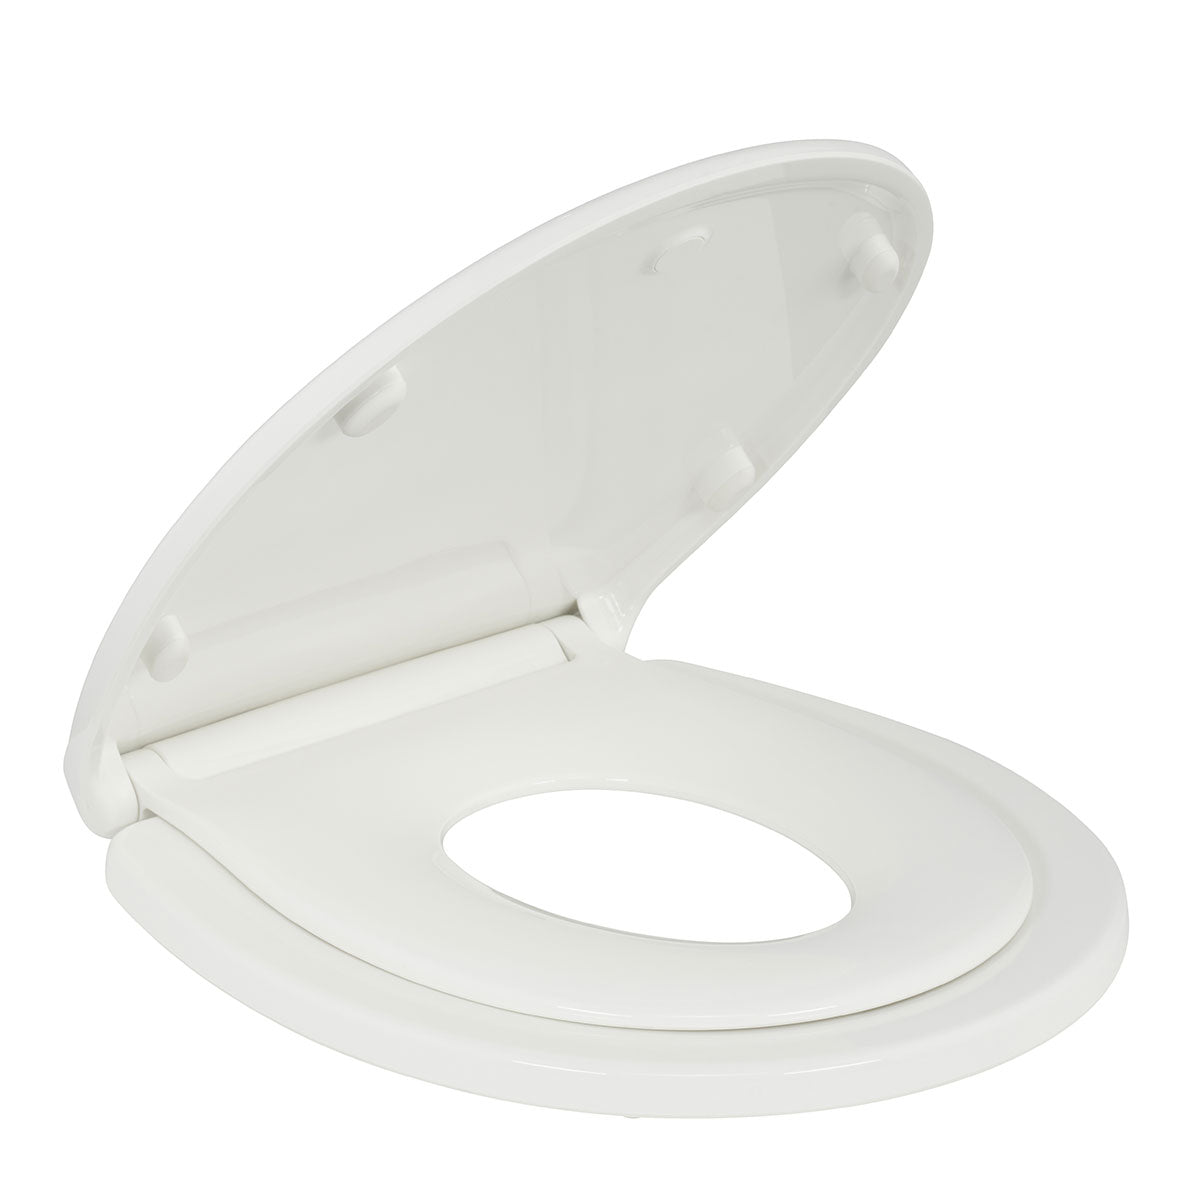 Round Kingsport Family Toilet Seat with Built-In Child Seat